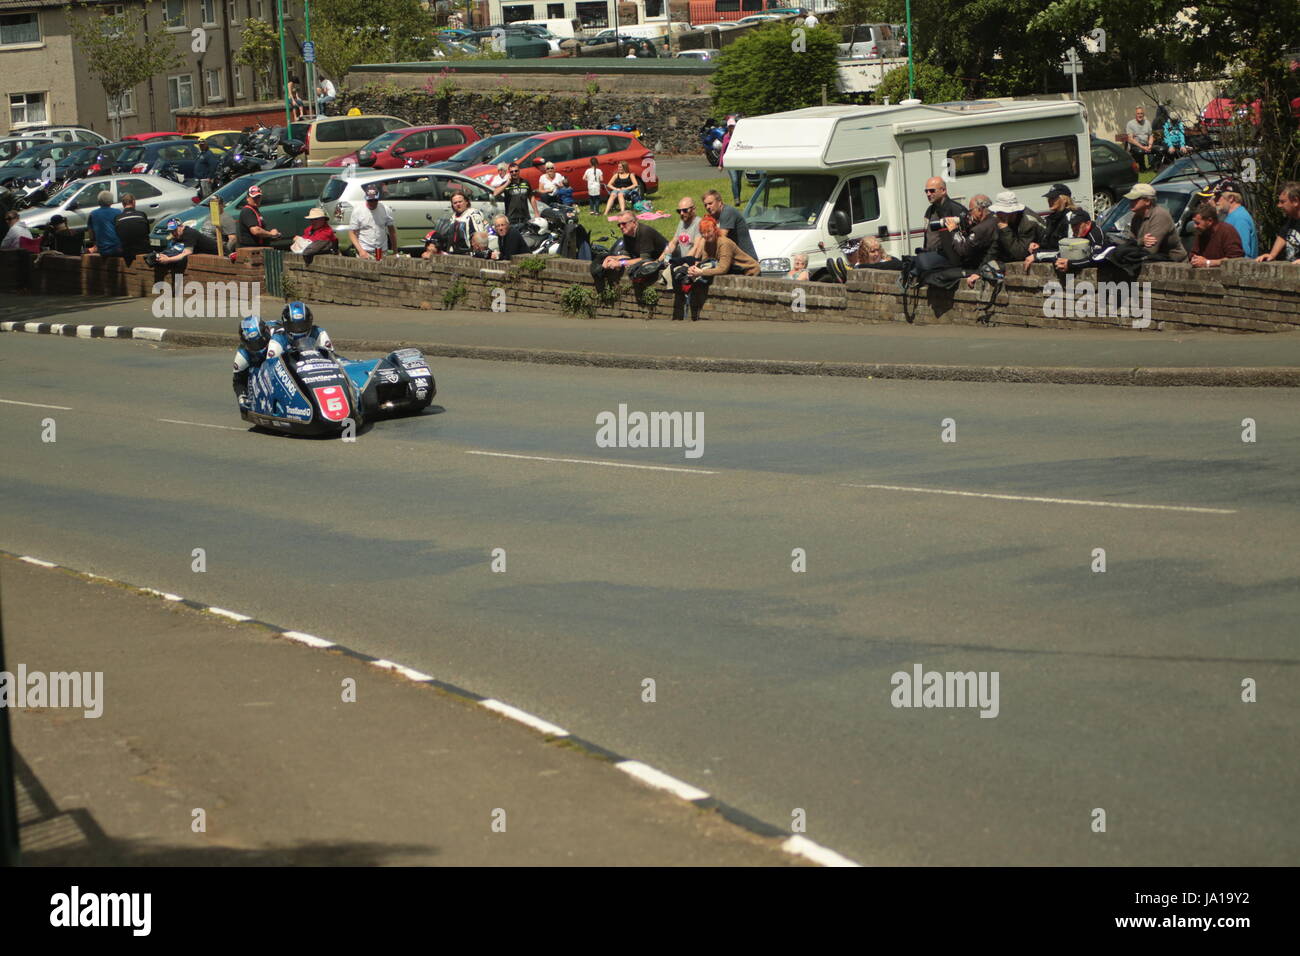 Isle of Man TT Races, Sidecar Qualifying Practice Race, Saturday 3 June 2017. Sidecar qualifying session. Number 6, Peter Founds and Jevan Walmsley on a 600cc LCR Honda sidecar of the Klaffi Racing team from Tenterden. Credit: Eclectic Art and Photography/Alamy Live News Stock Photo